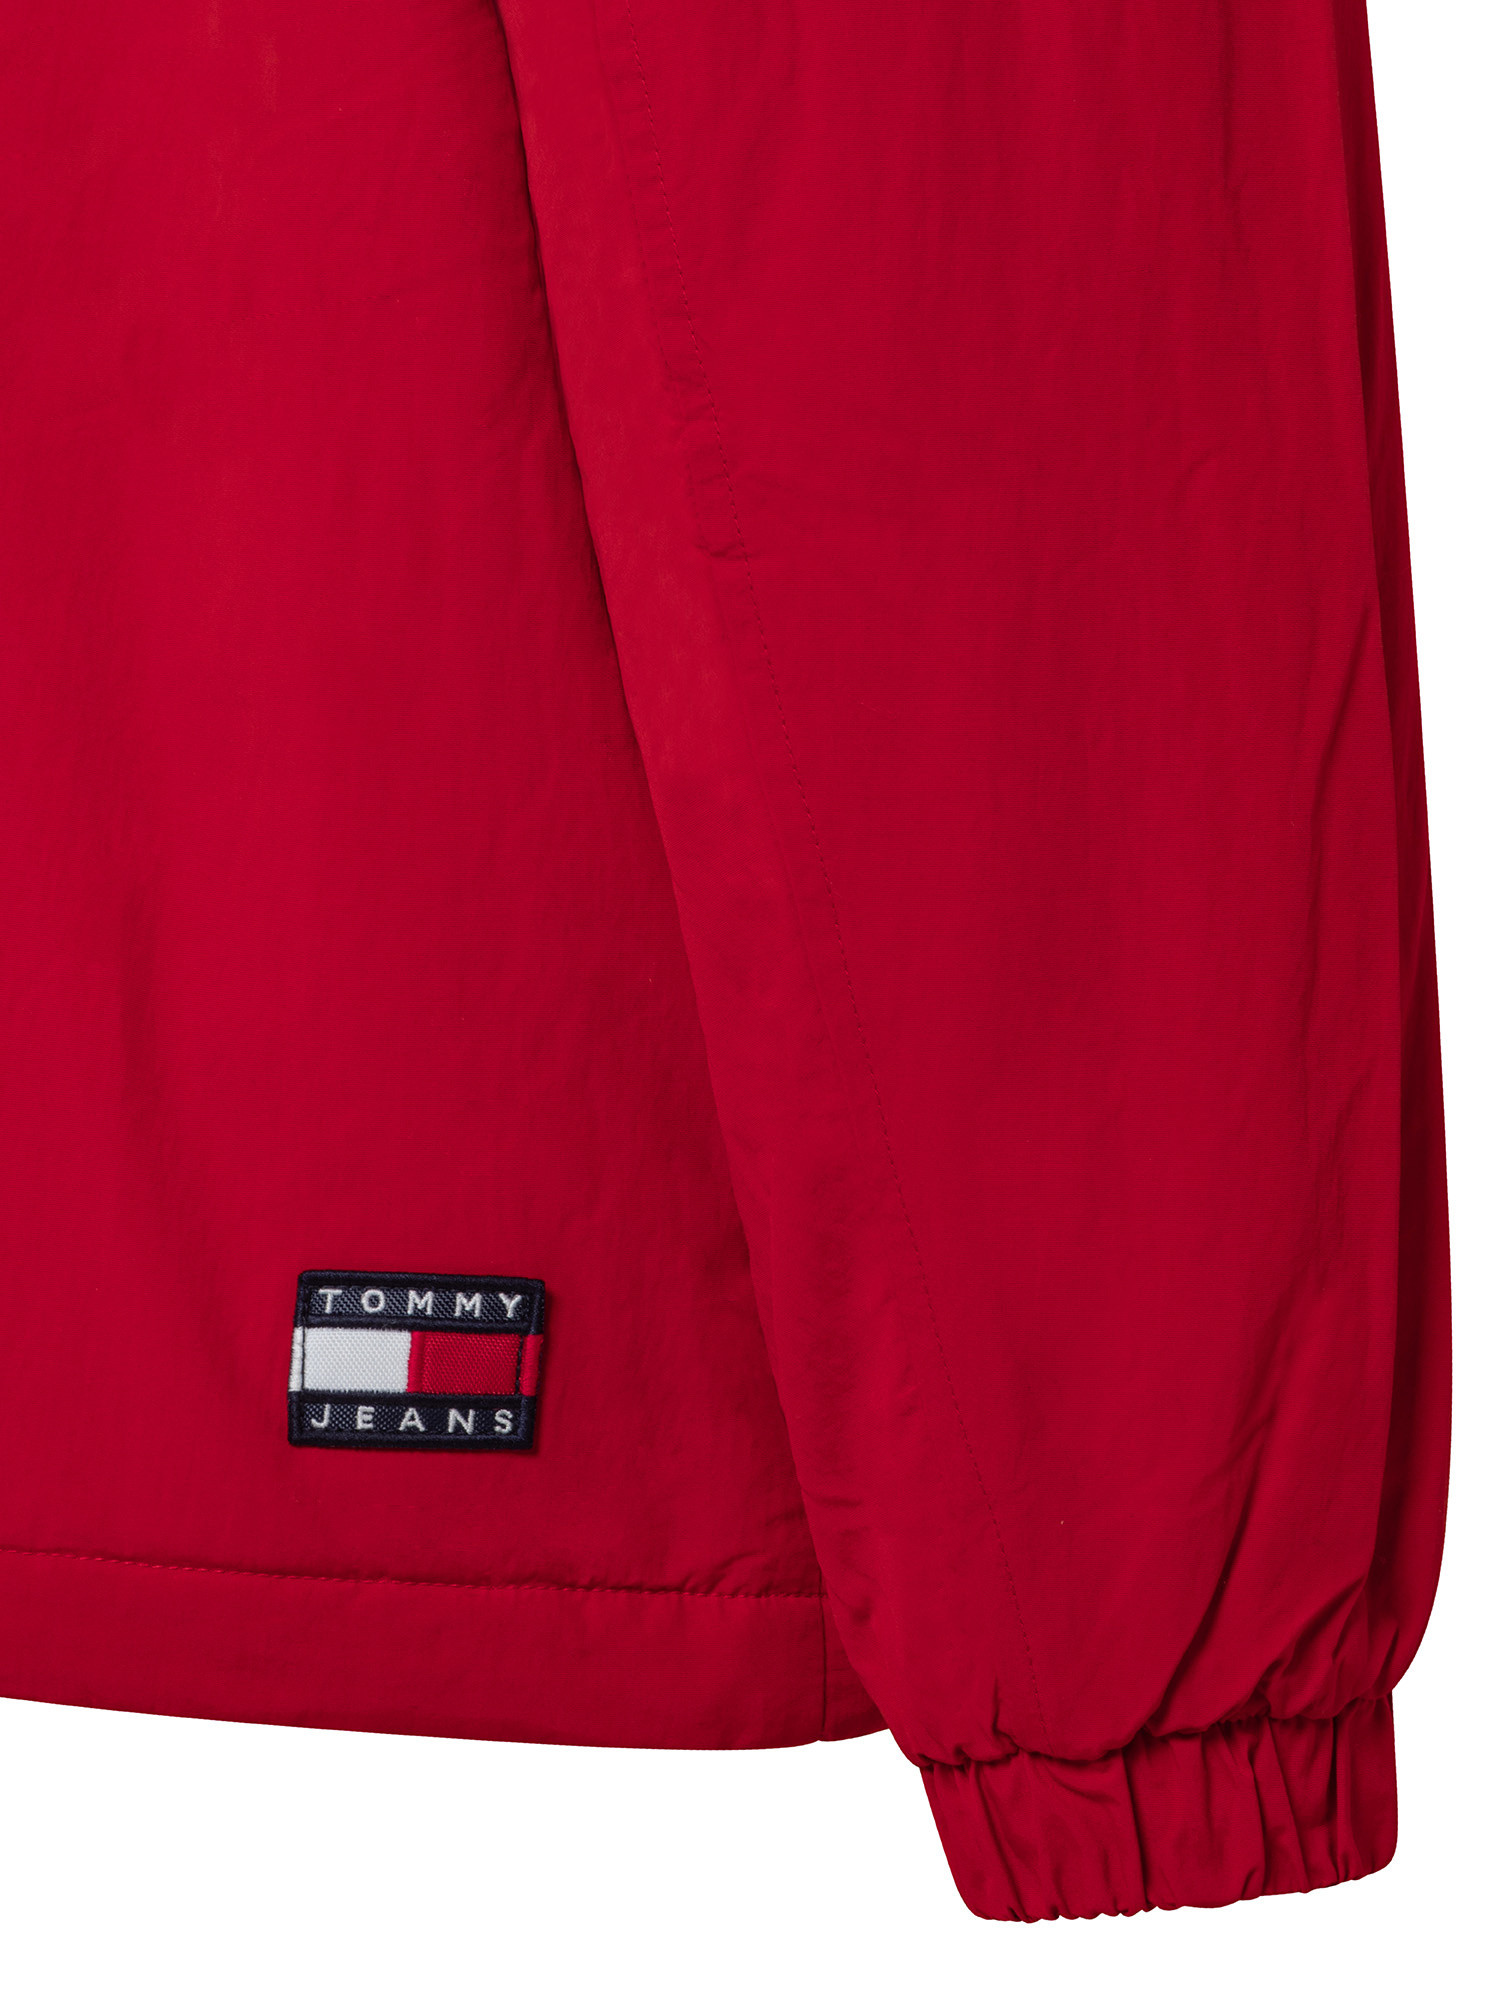 Tommy Jeans - Lightweight hooded jacket, Red, large image number 2